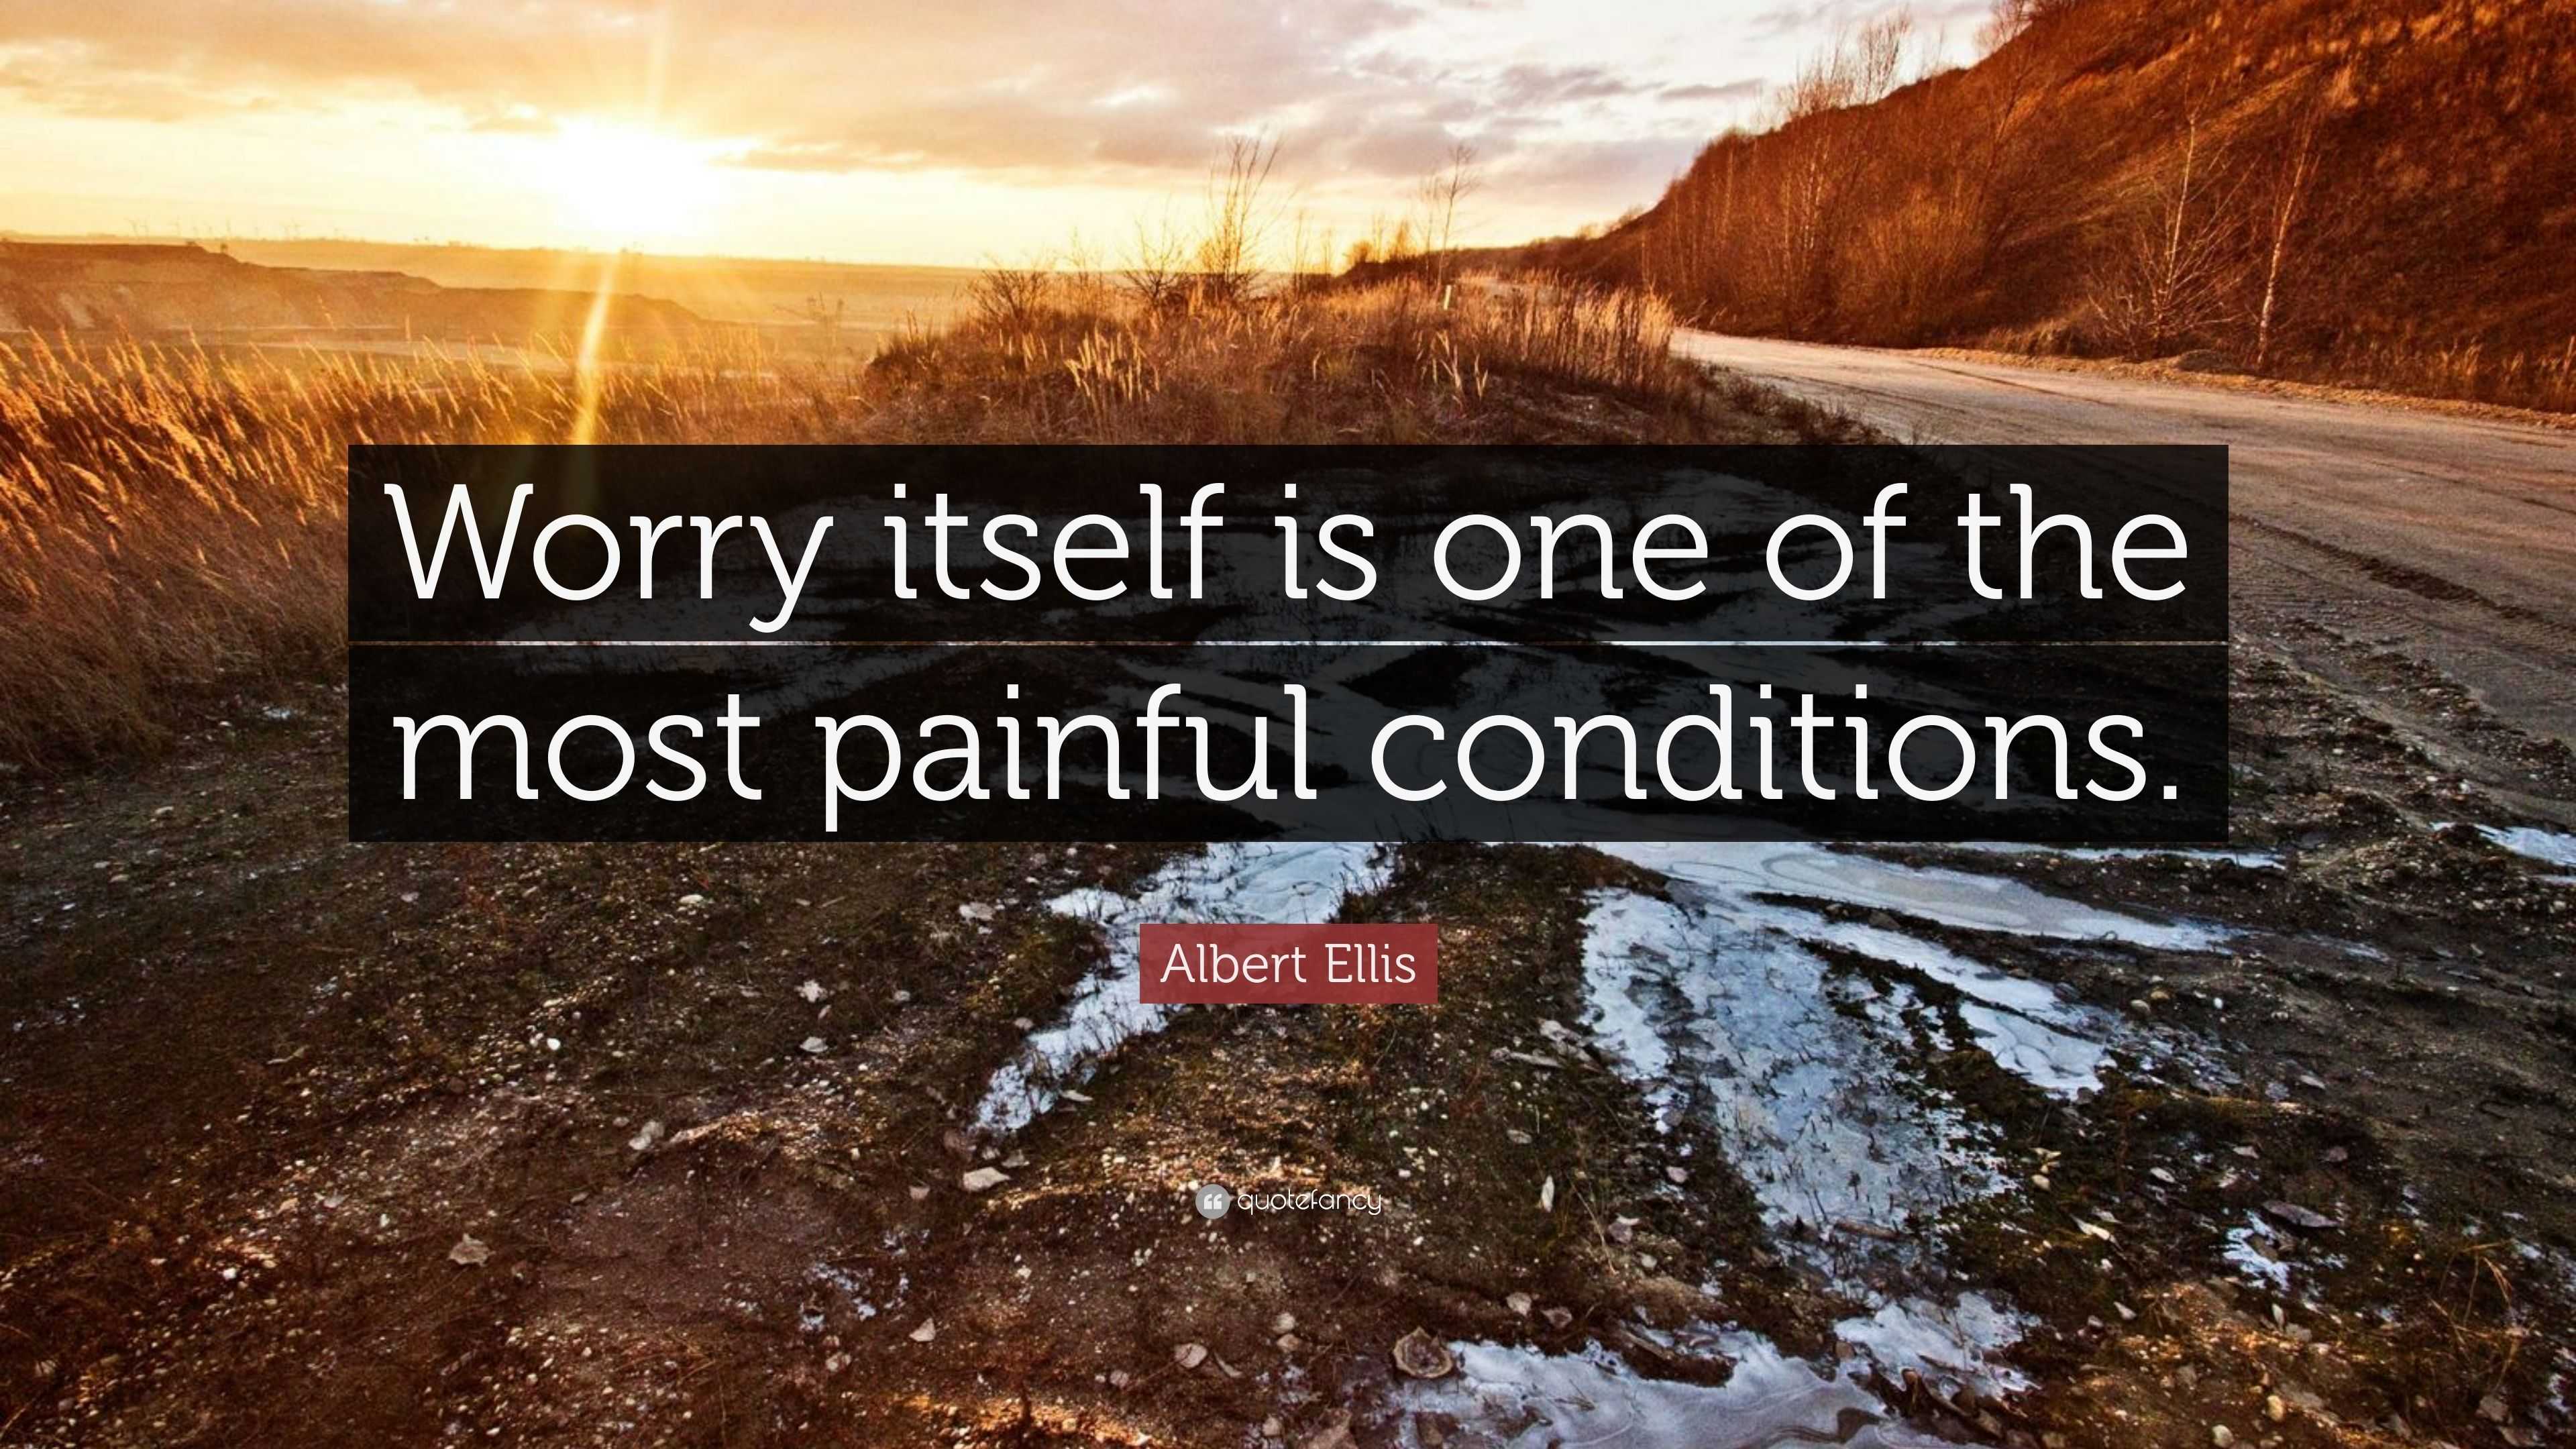 Albert Ellis Quote “Worry itself is one of the most painful conditions ”